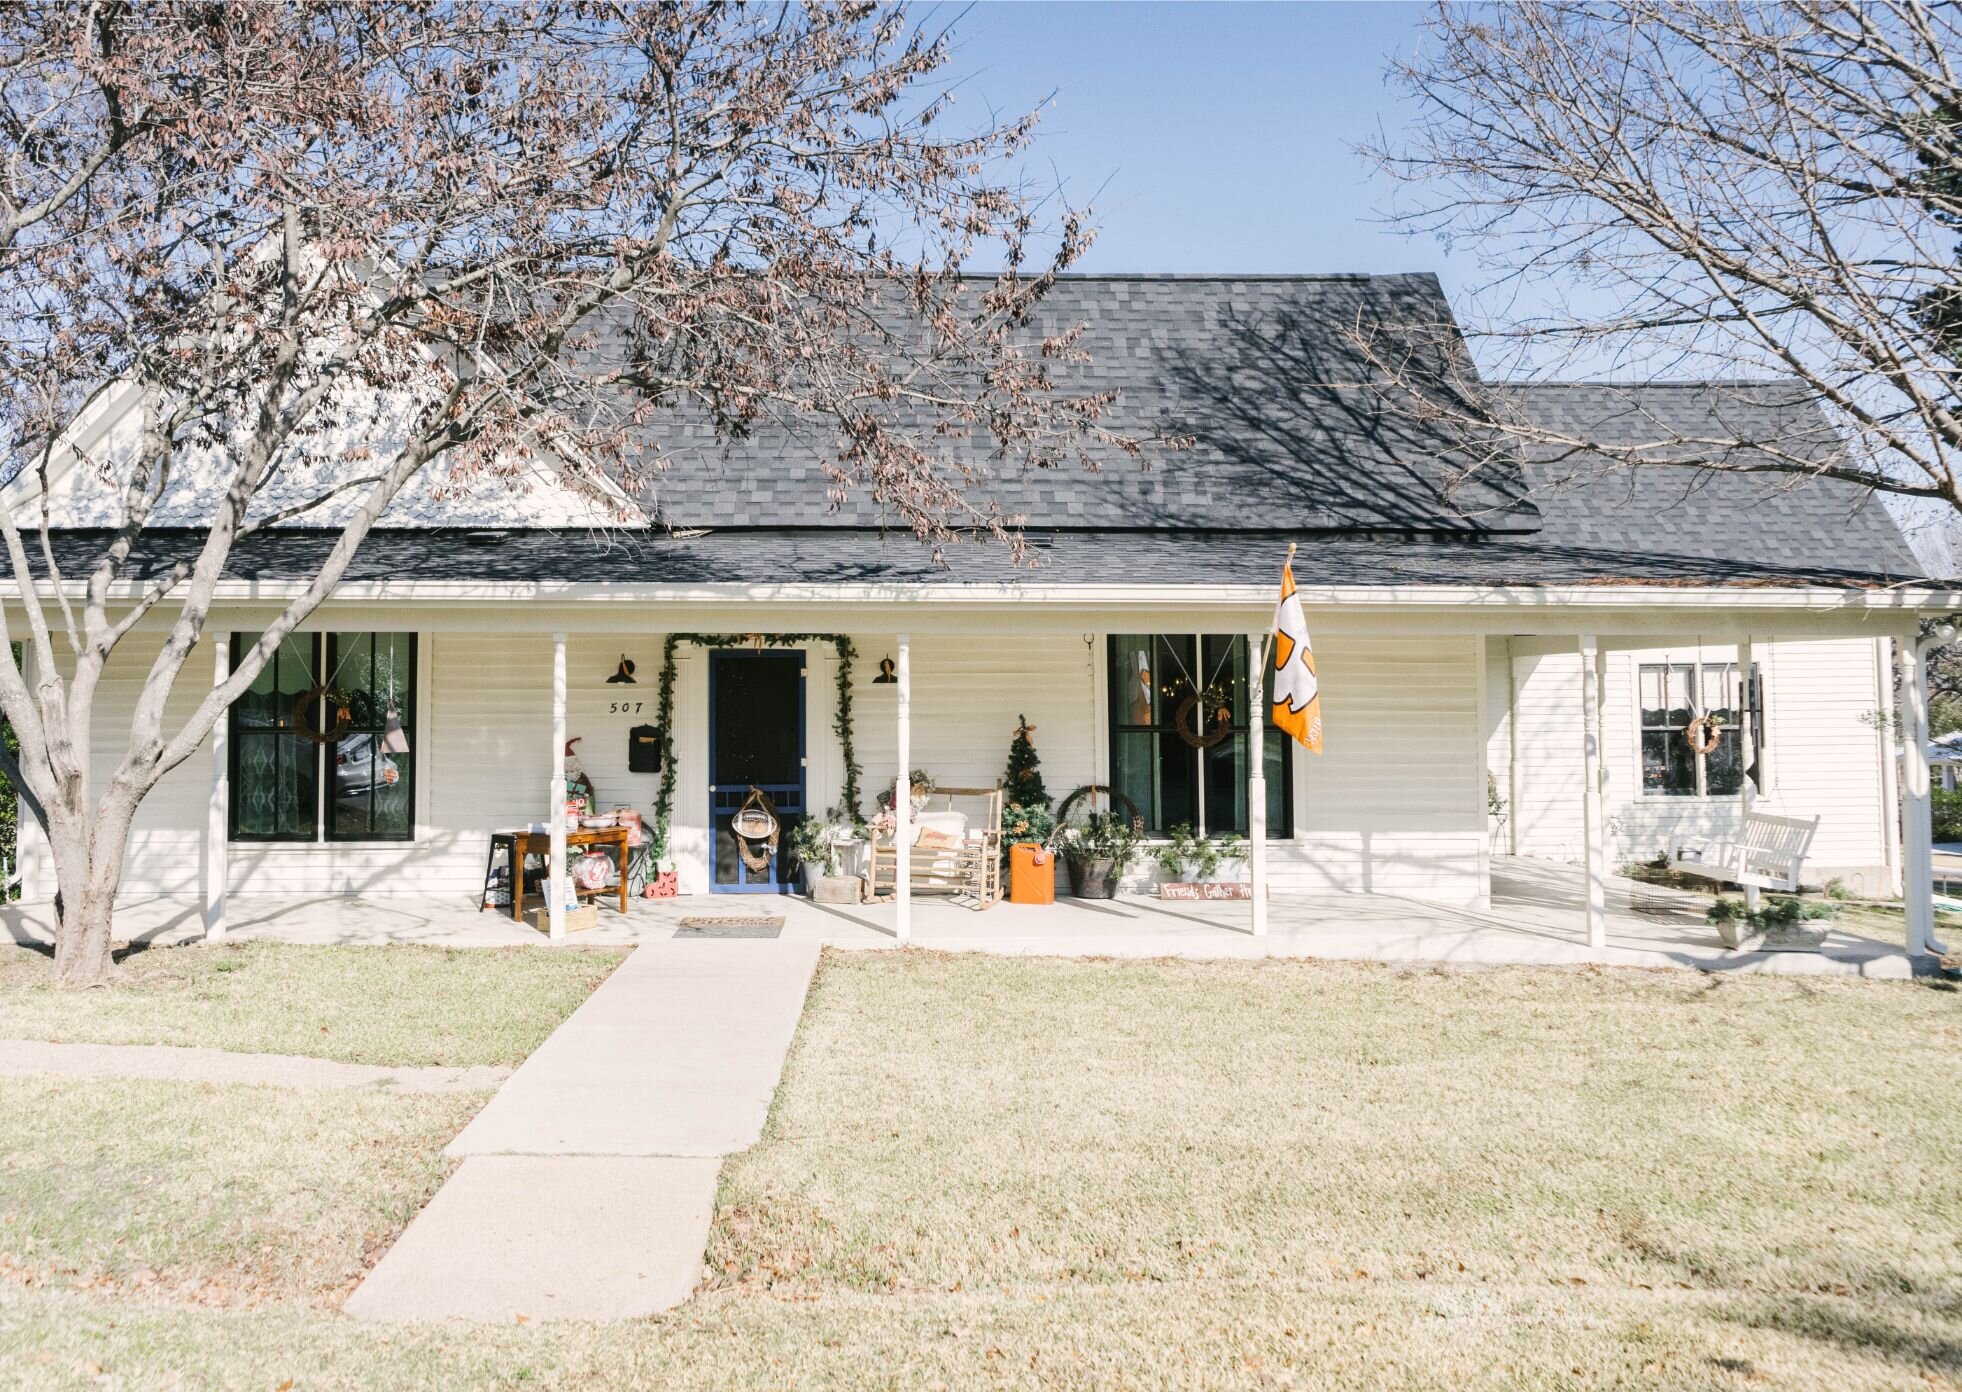 Rockwall Holiday Home Tour 2019-09624.jpg